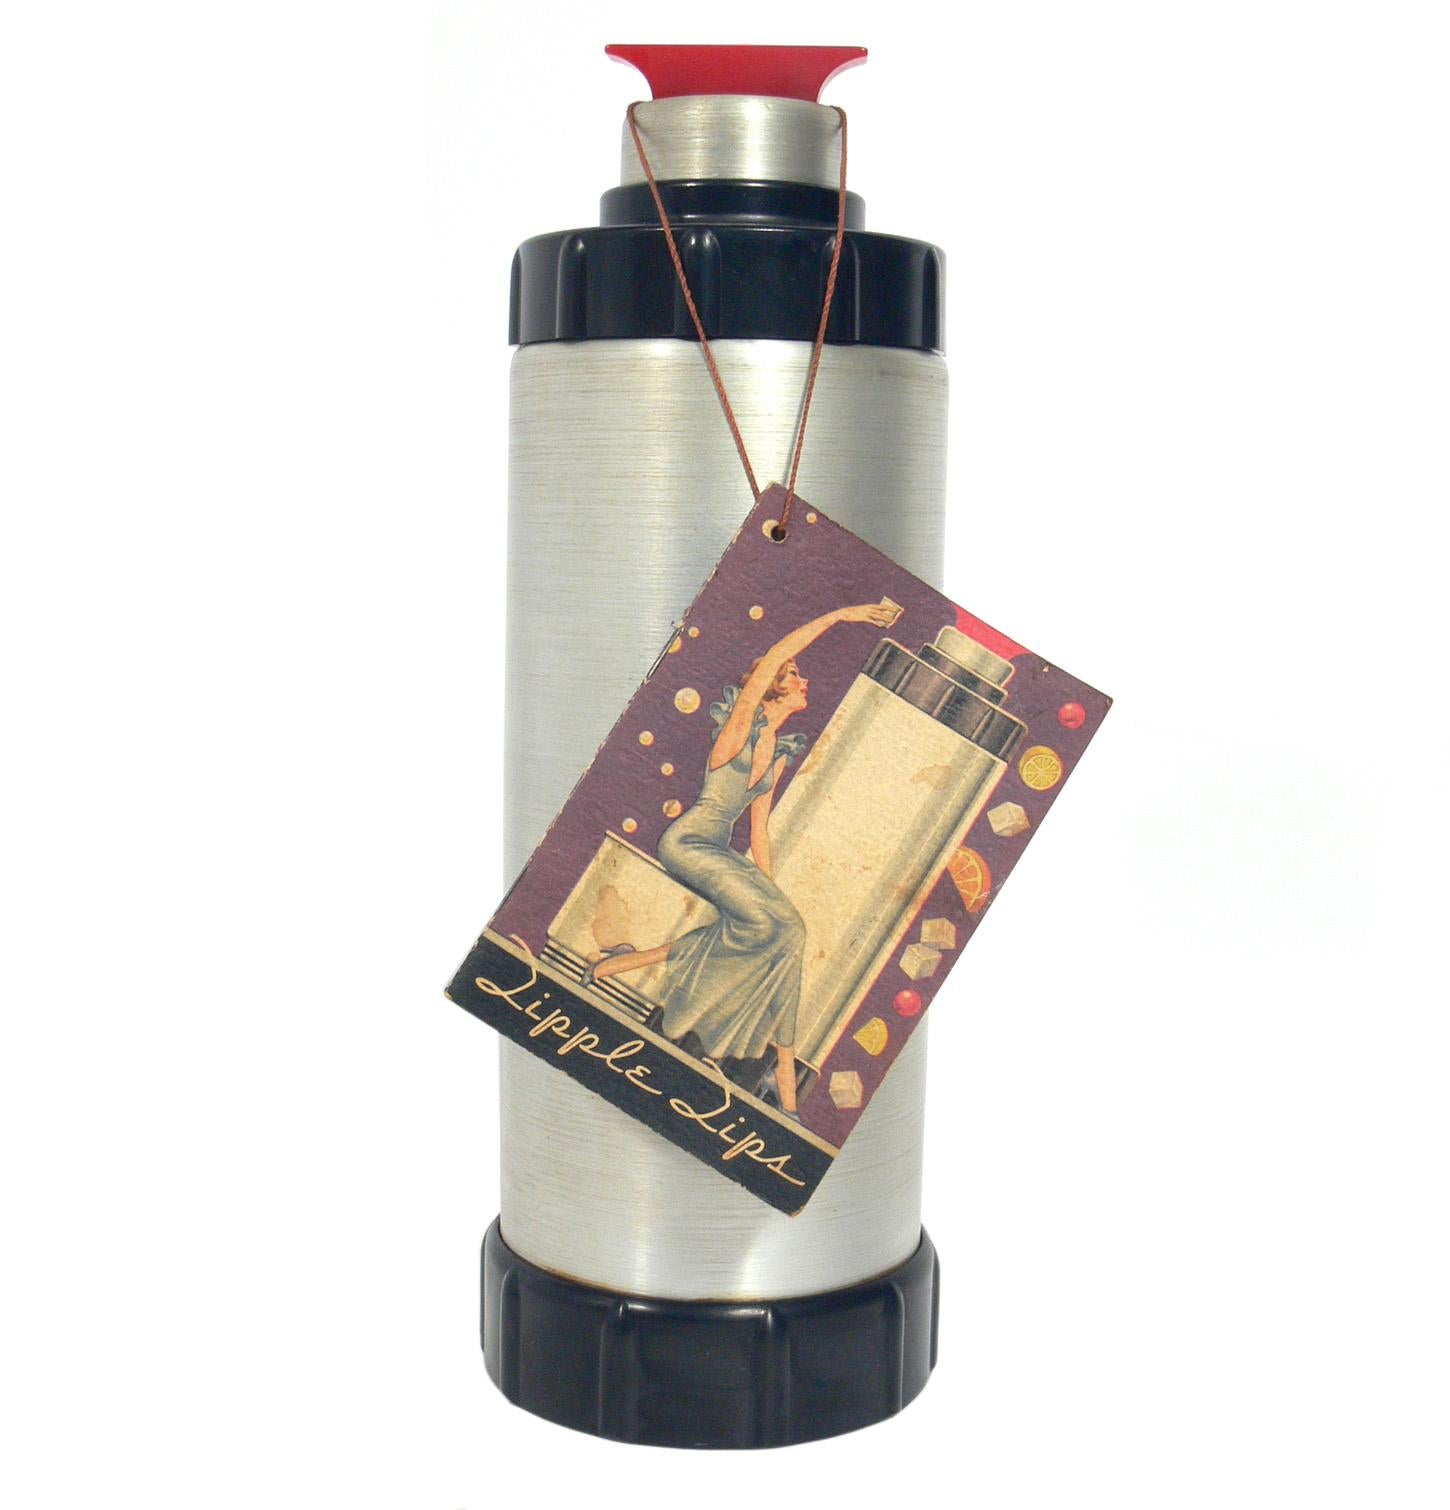 American Art Deco cocktail shaker, designed by Ralph Kirchler for West bend aluminium company, circa 1930s. Beautiful Art Deco design in spun aluminium and red Bakelite. It comes with it's original hang tag booklet, entitled 